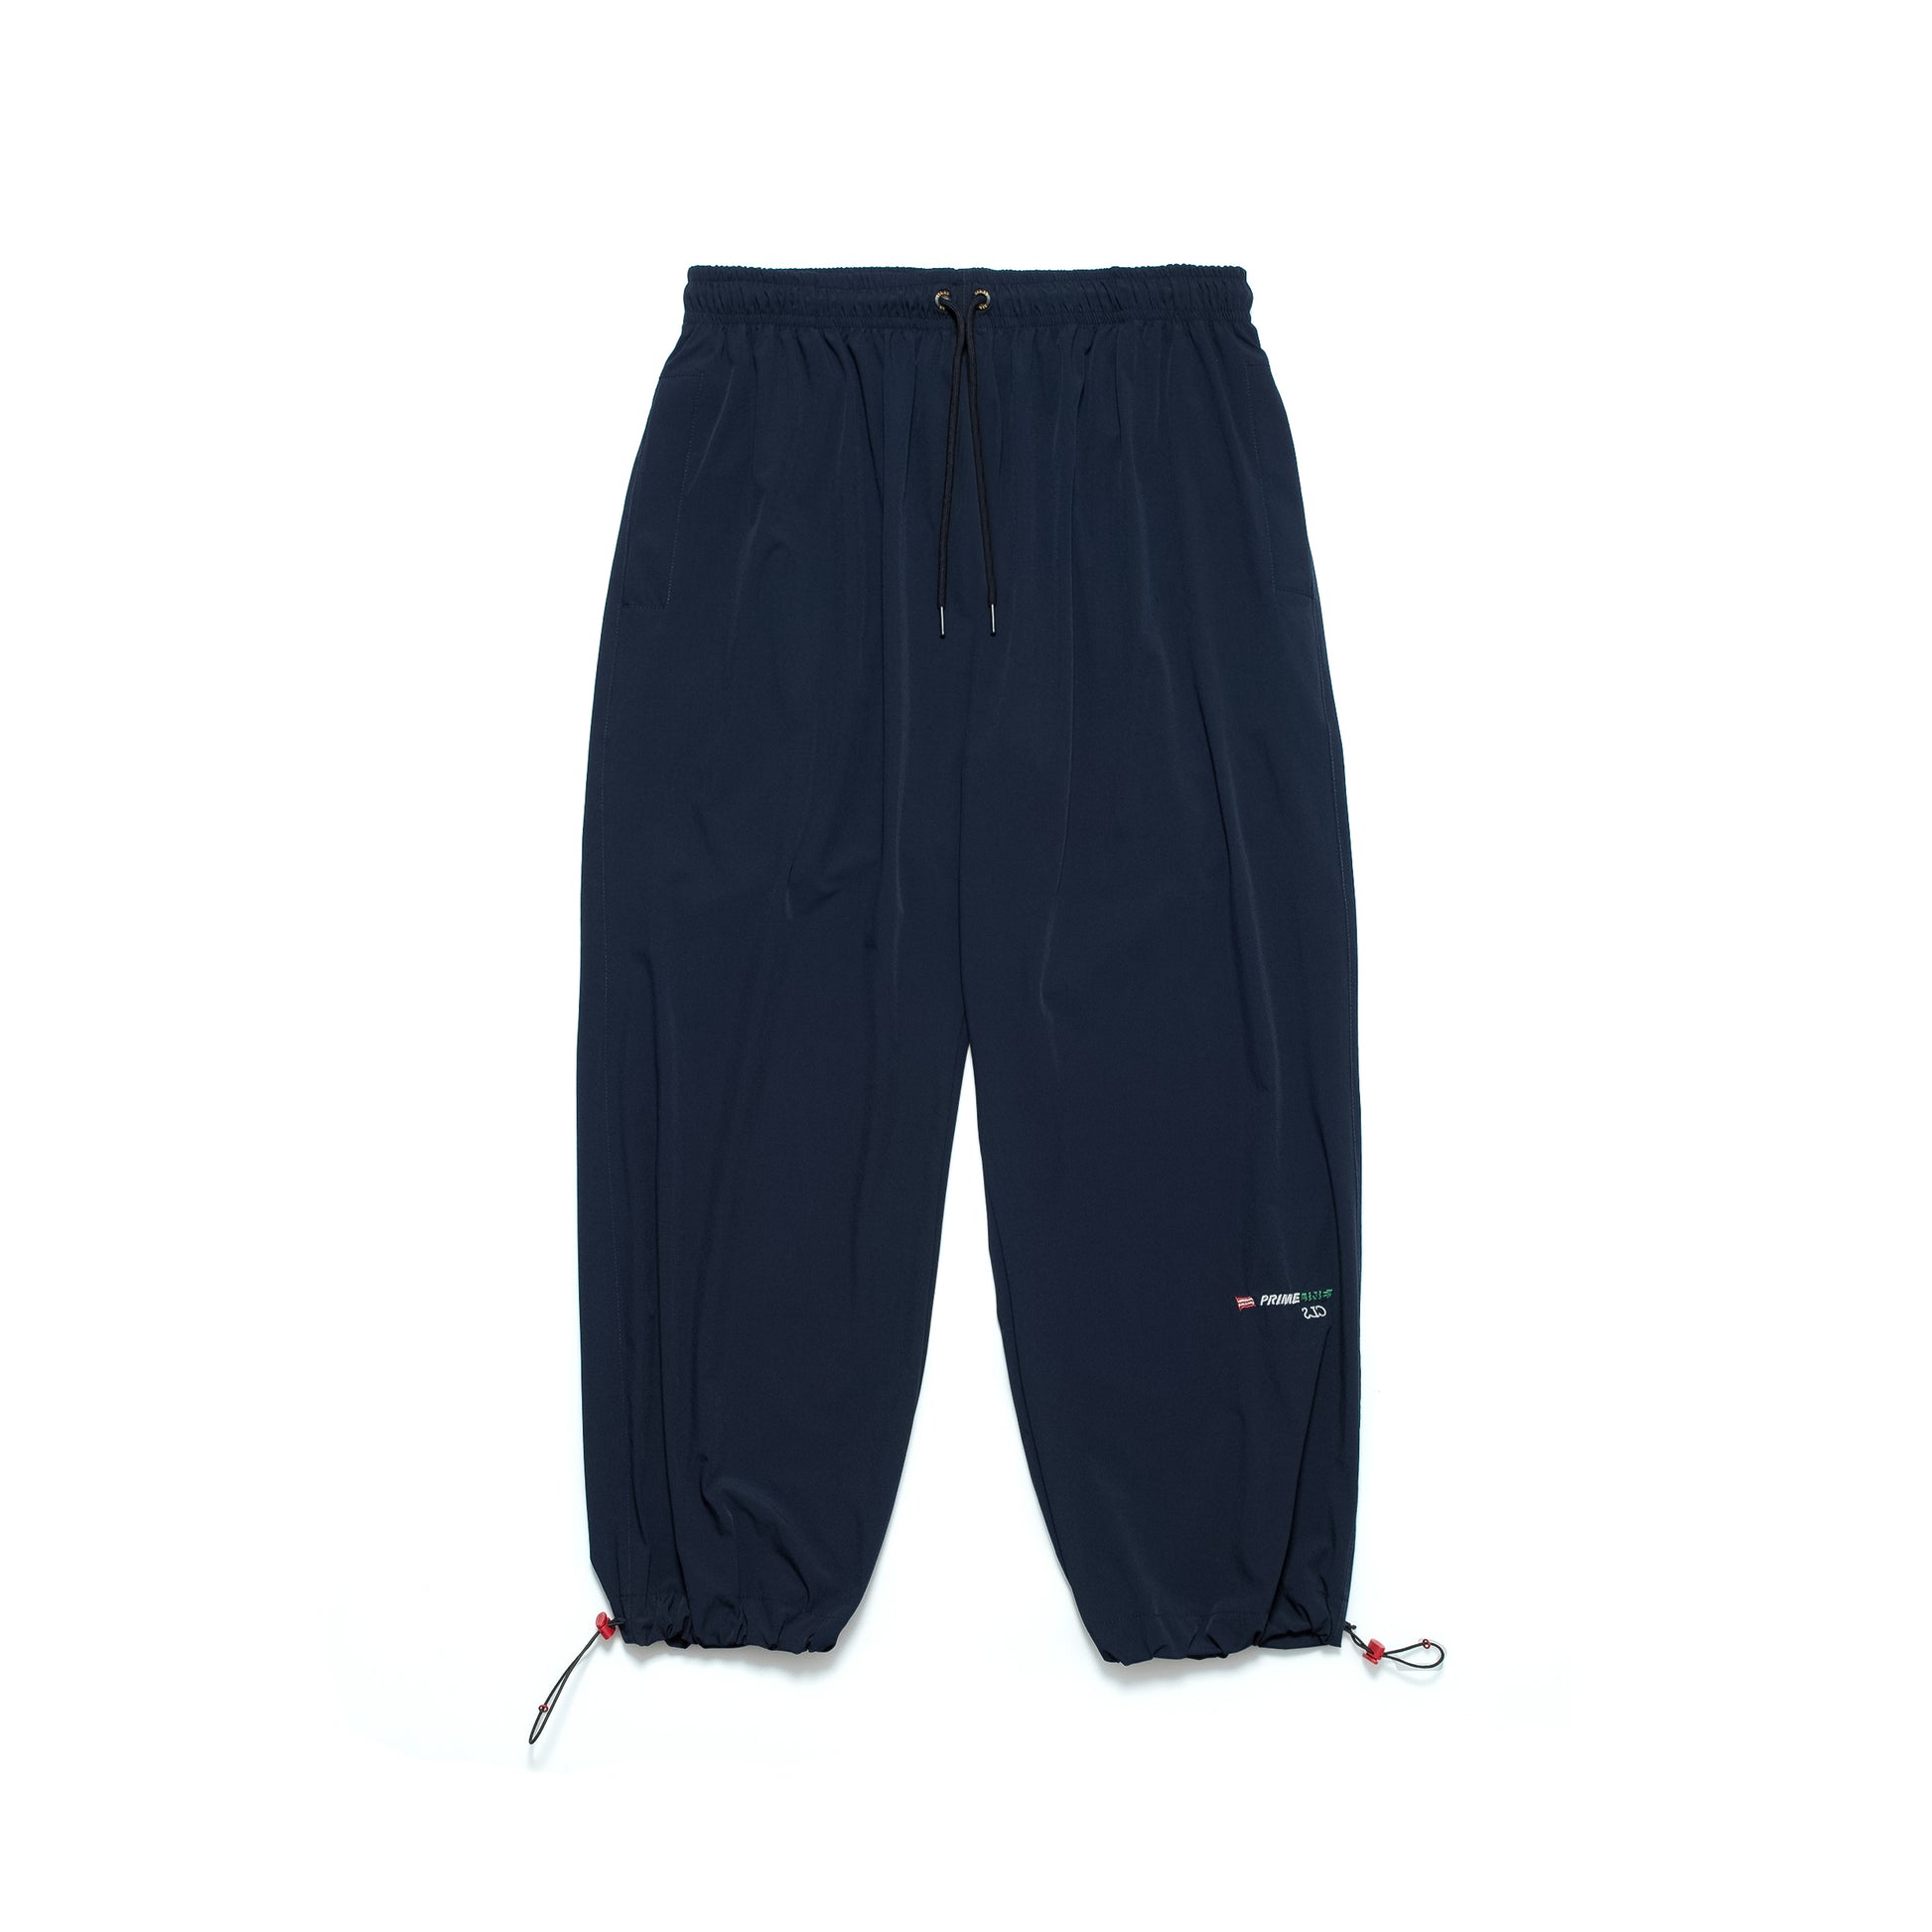 CLASS - Sport Pants Primeline "Navy" - THE GAME